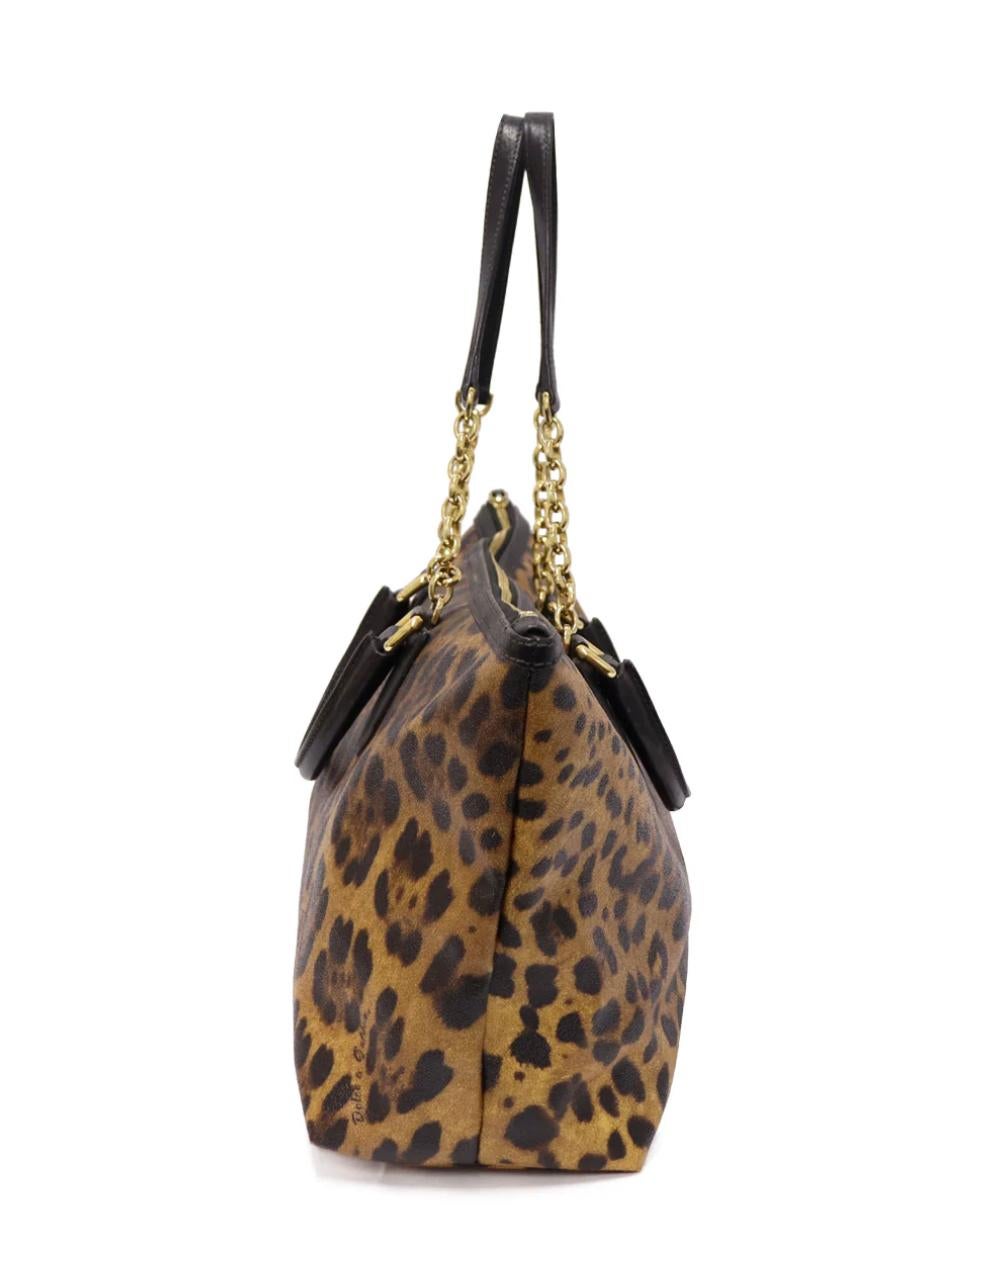 Dolce and Gabbana Leopard Print Canvas Tote For Sale 1